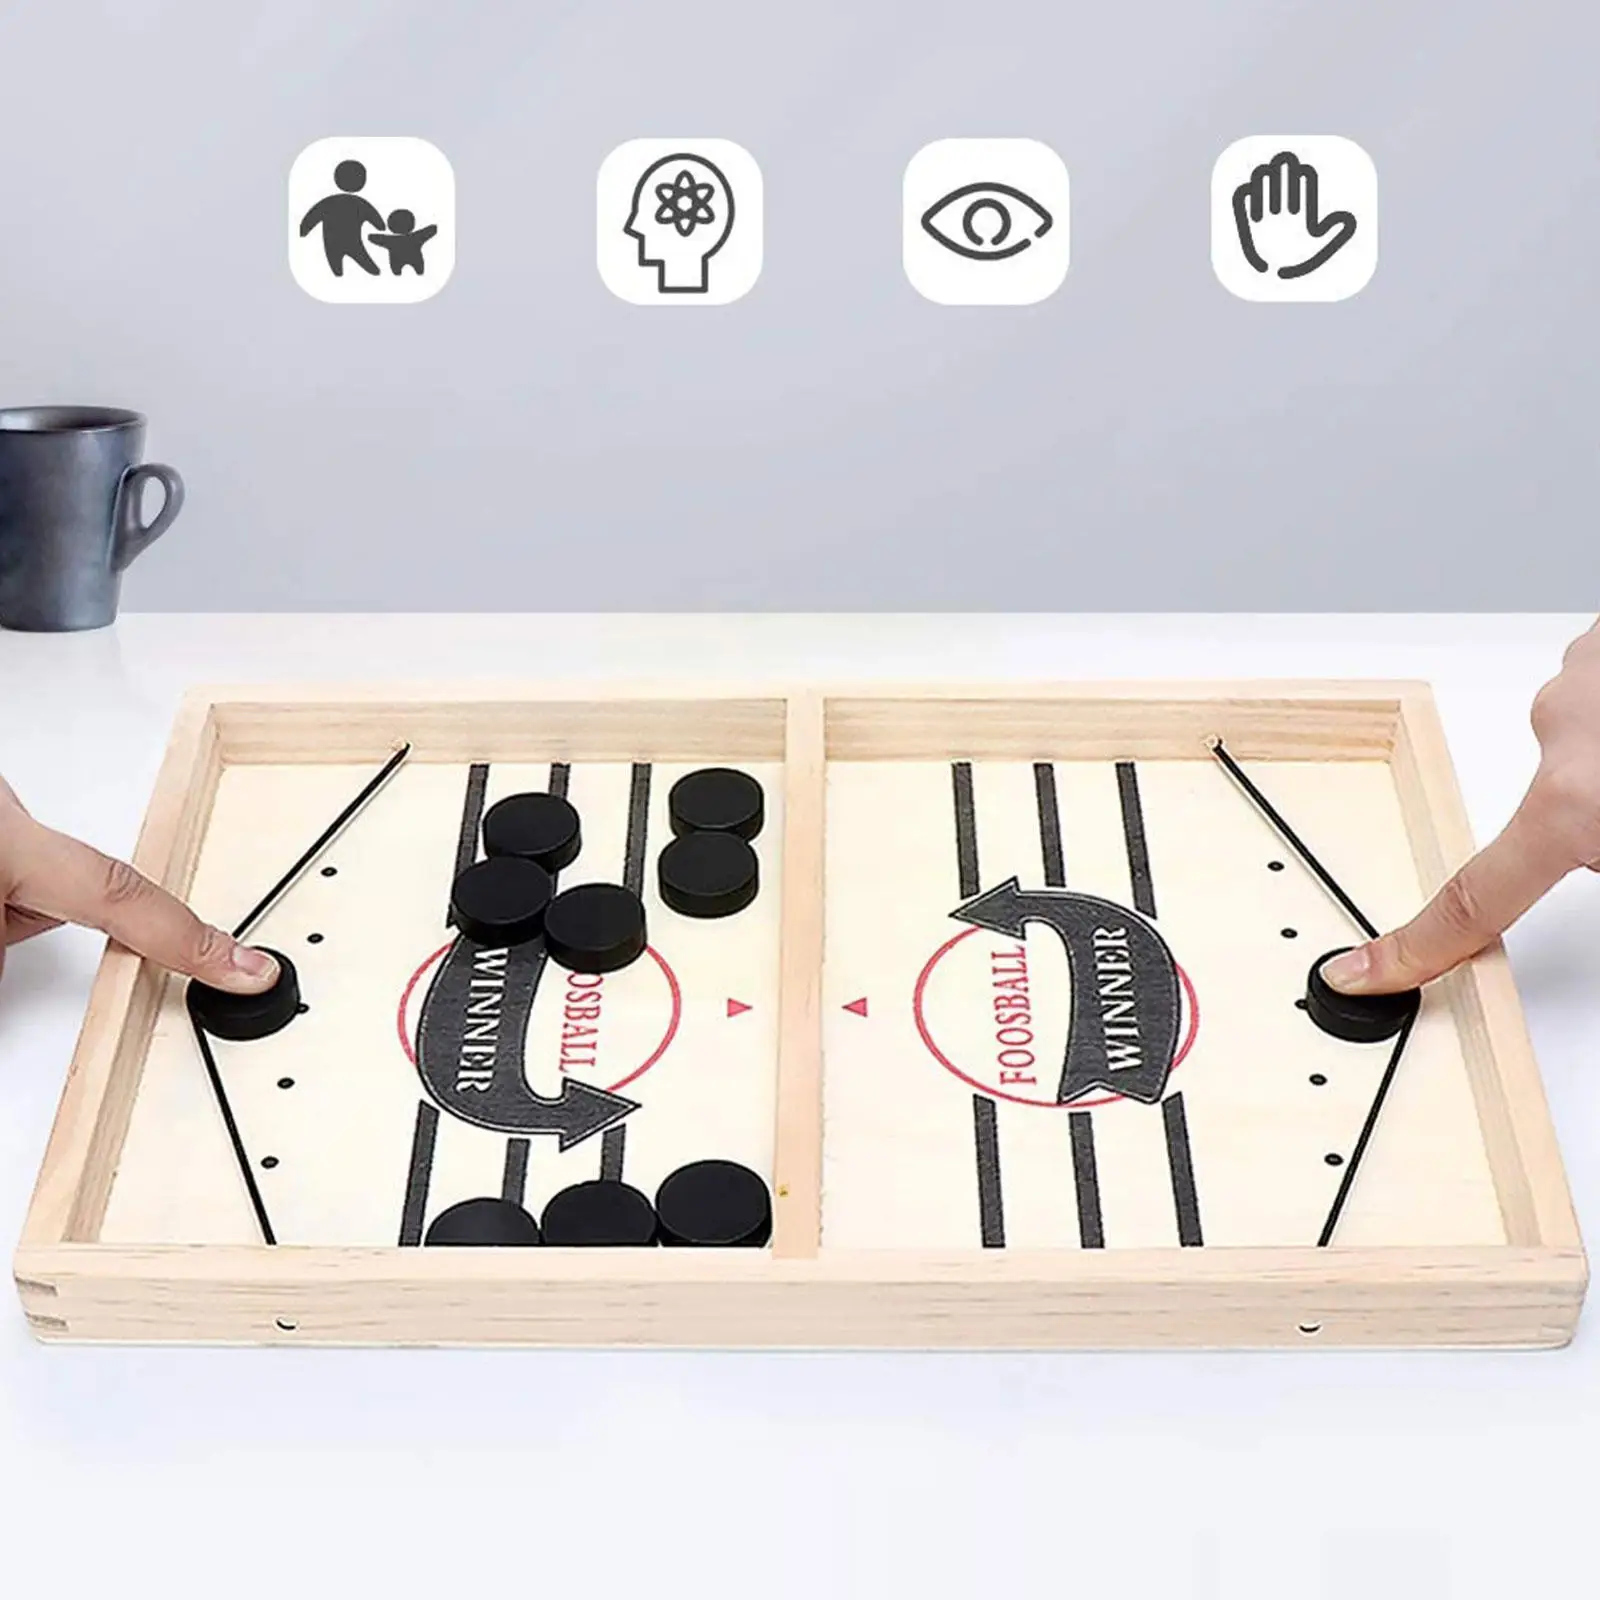 Foosball Winner Games Table Hockey Game Catapult Chess Fast Sling Puck Board Game Toys For Children Parent-child Interactiv I8W7